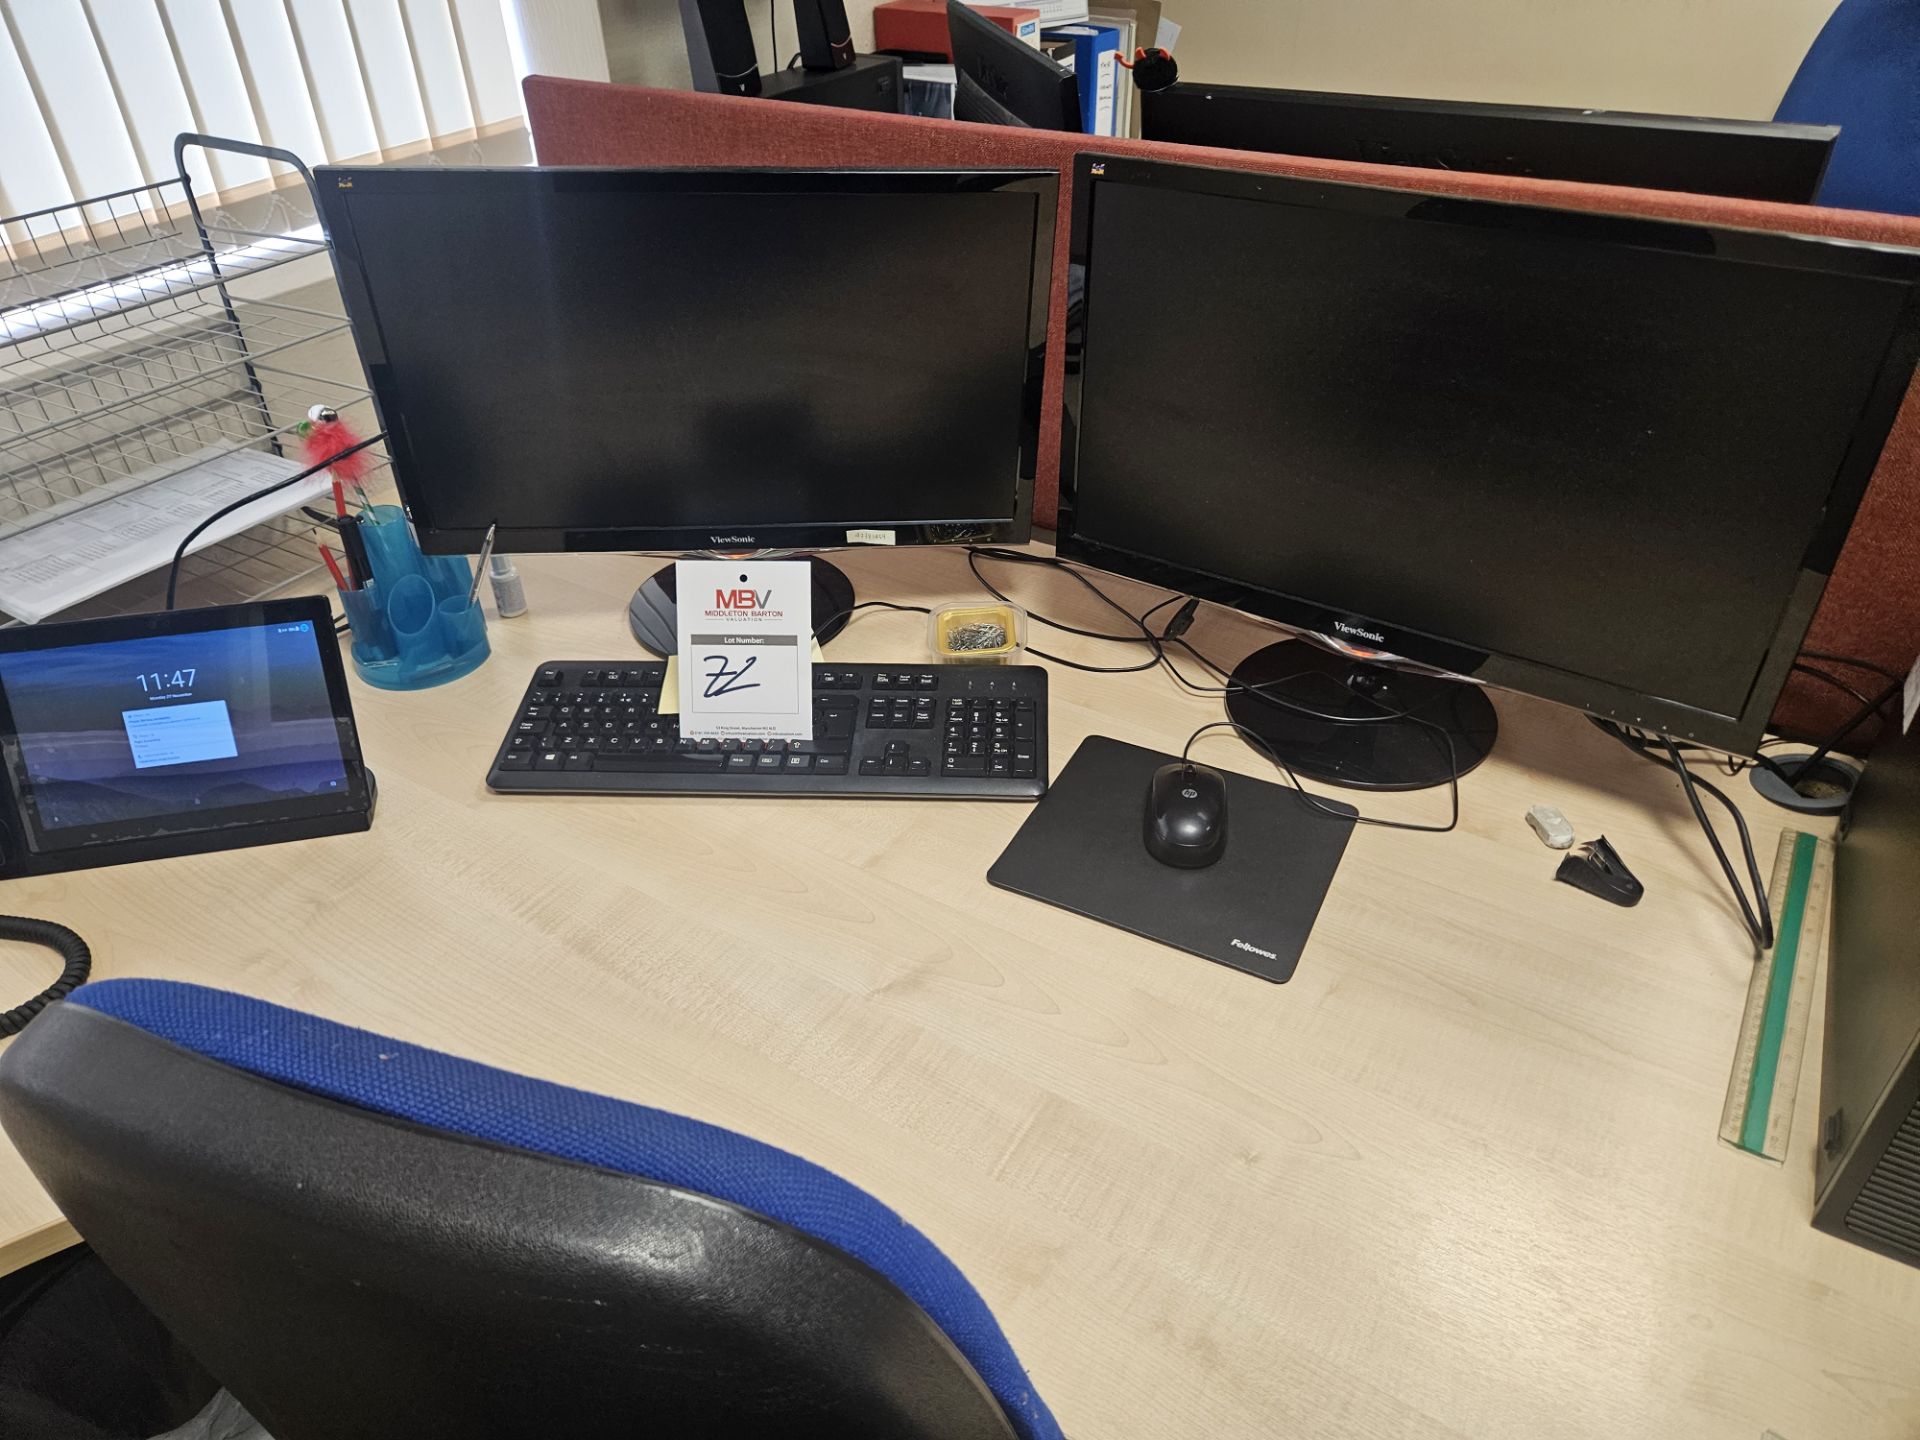 2 x Sonic View monitors and Desk Plus Chair ( not including Phone system and Computer)